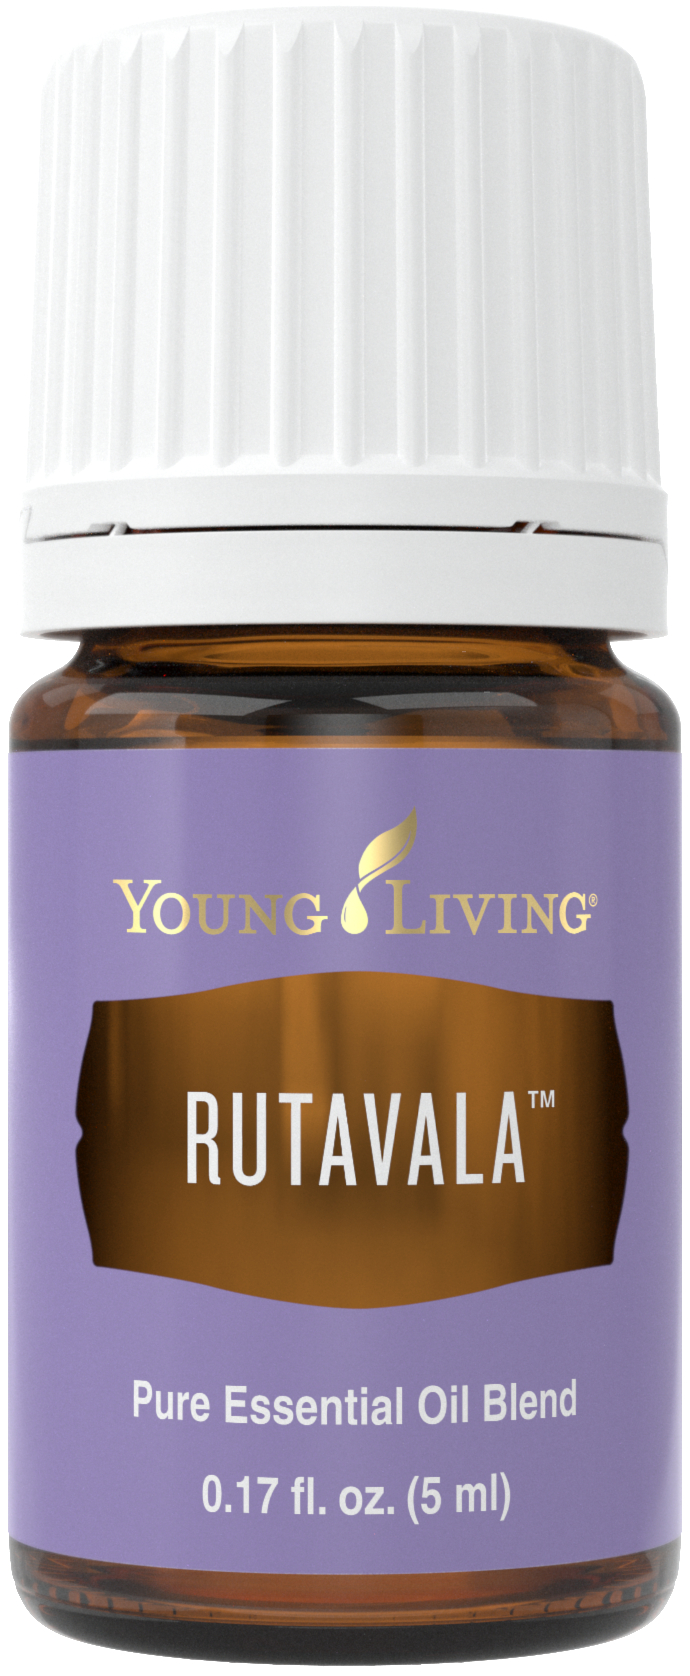 RutaVaLa Essential Oil Blend--Young Living Essential Oils